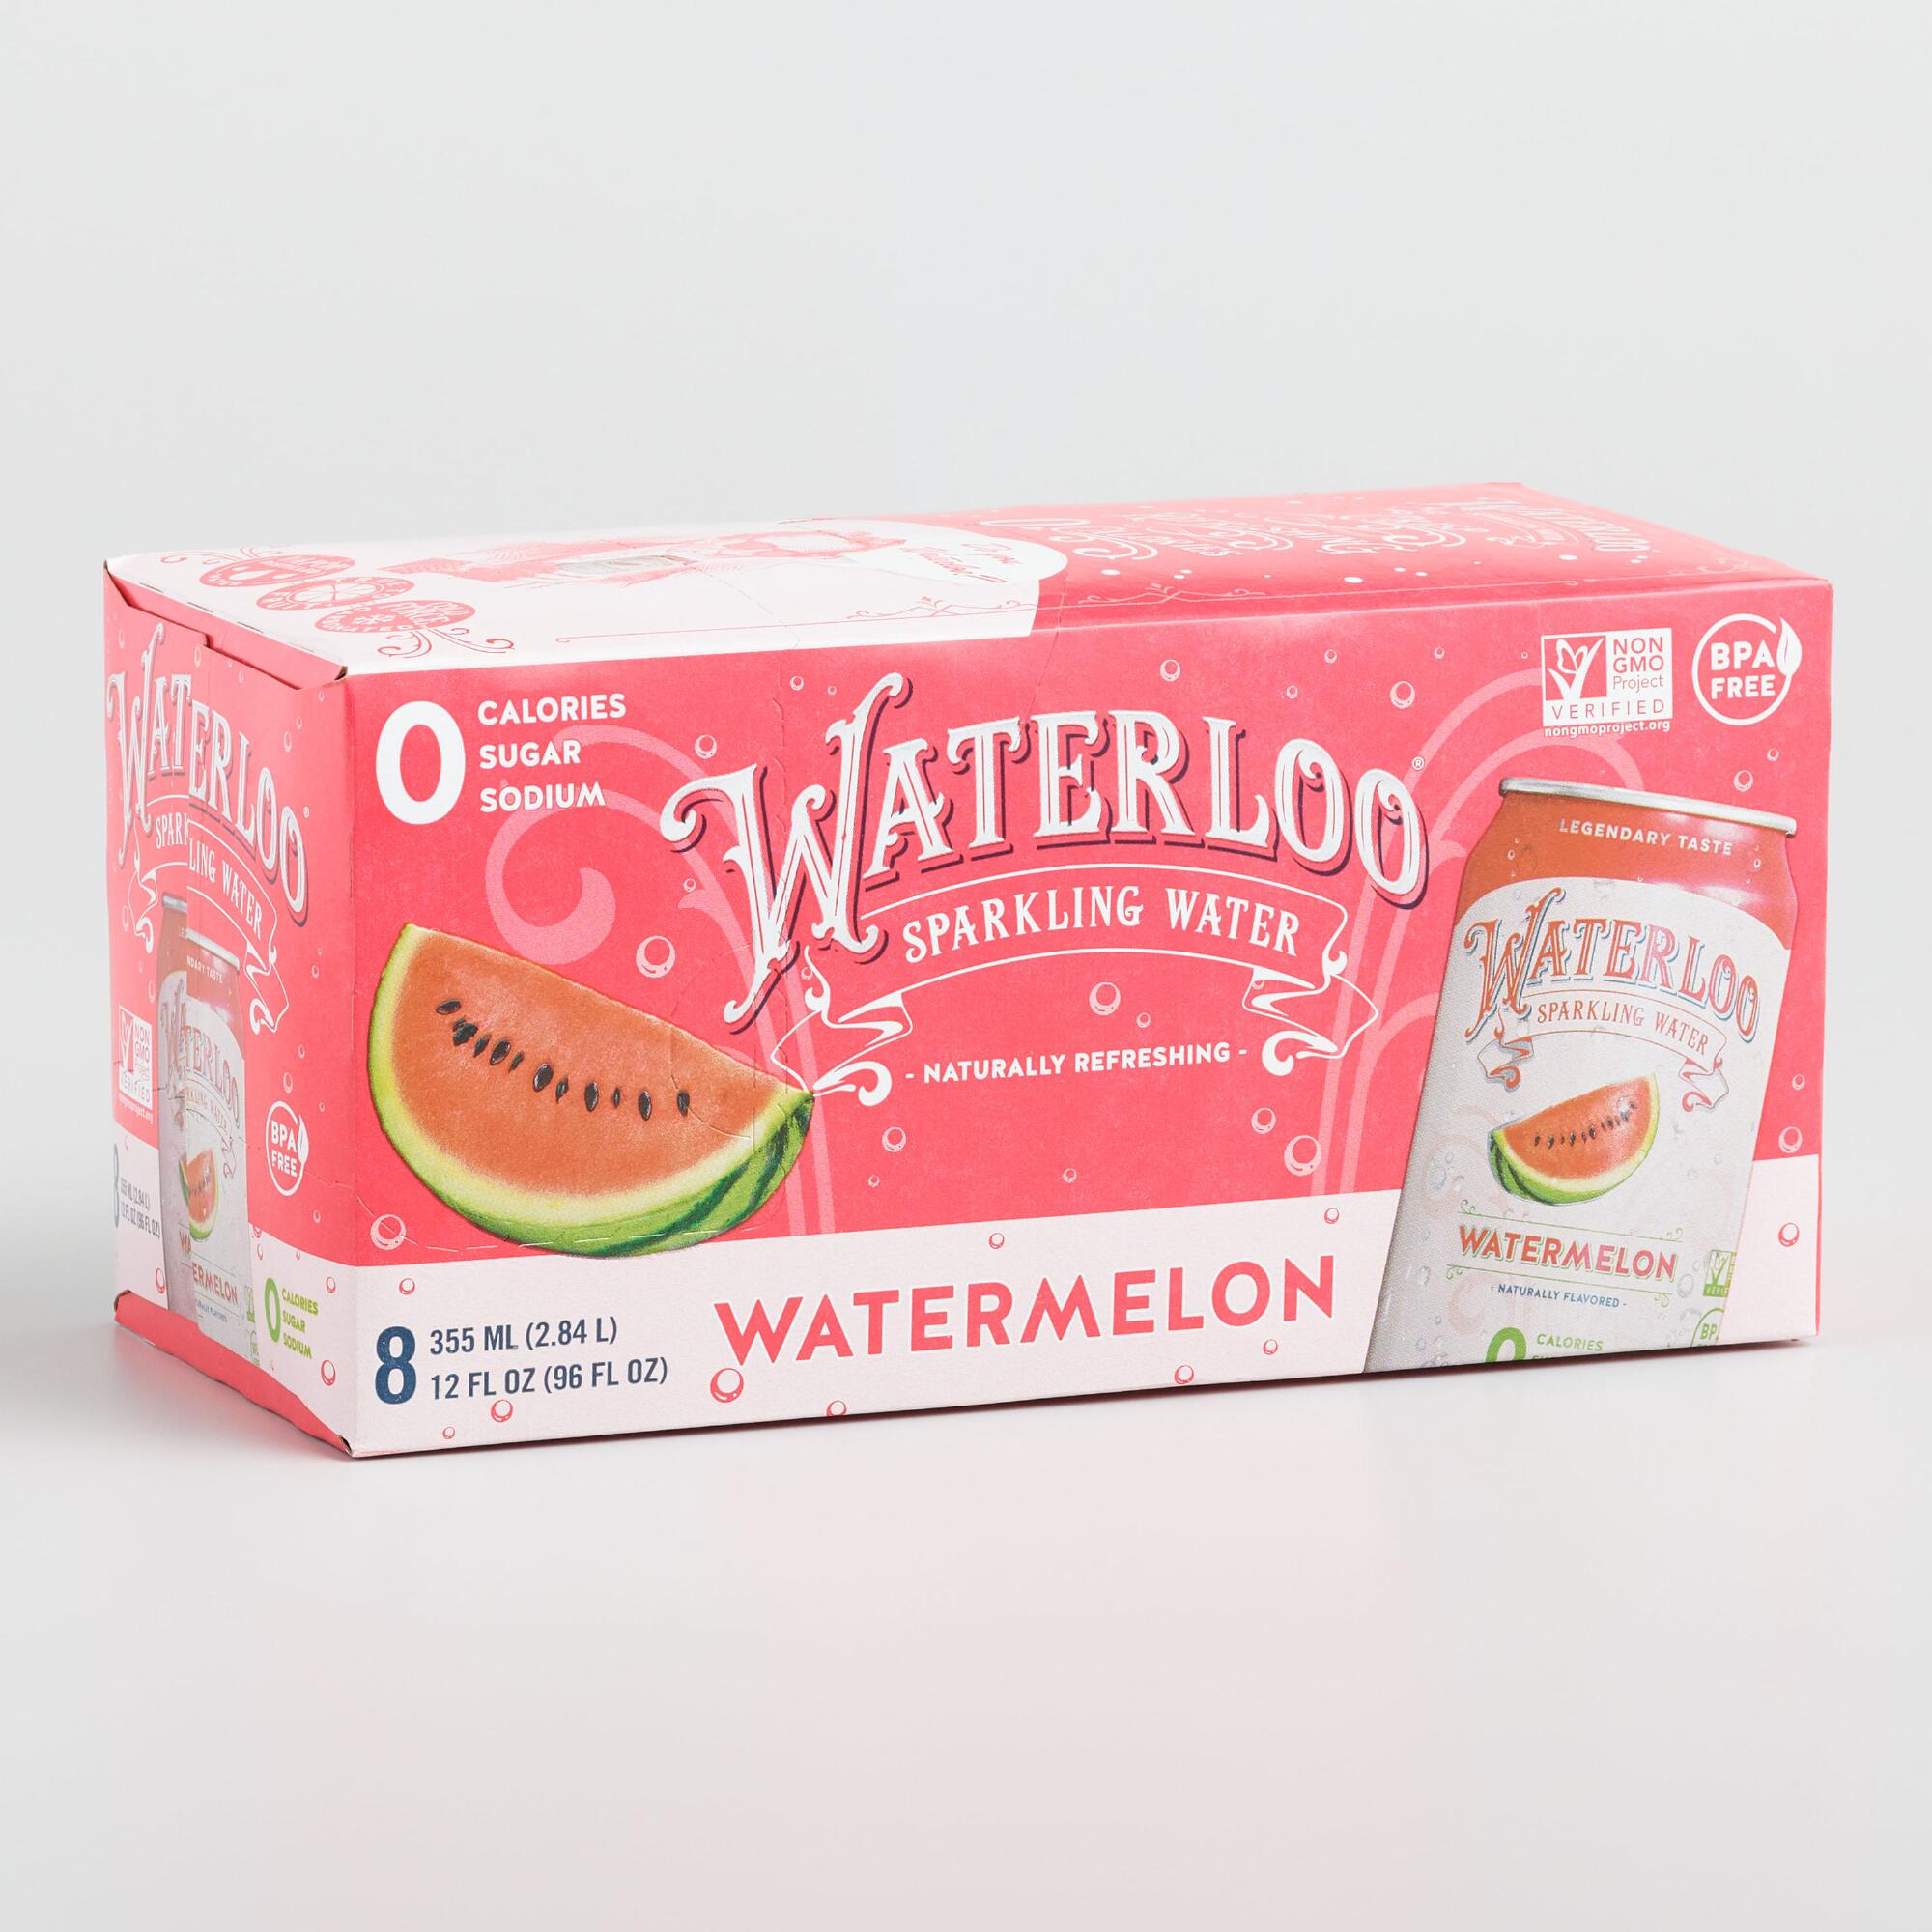 8 Pack Waterloo Watermelon Sparkling Water Set Of 3 by World Market